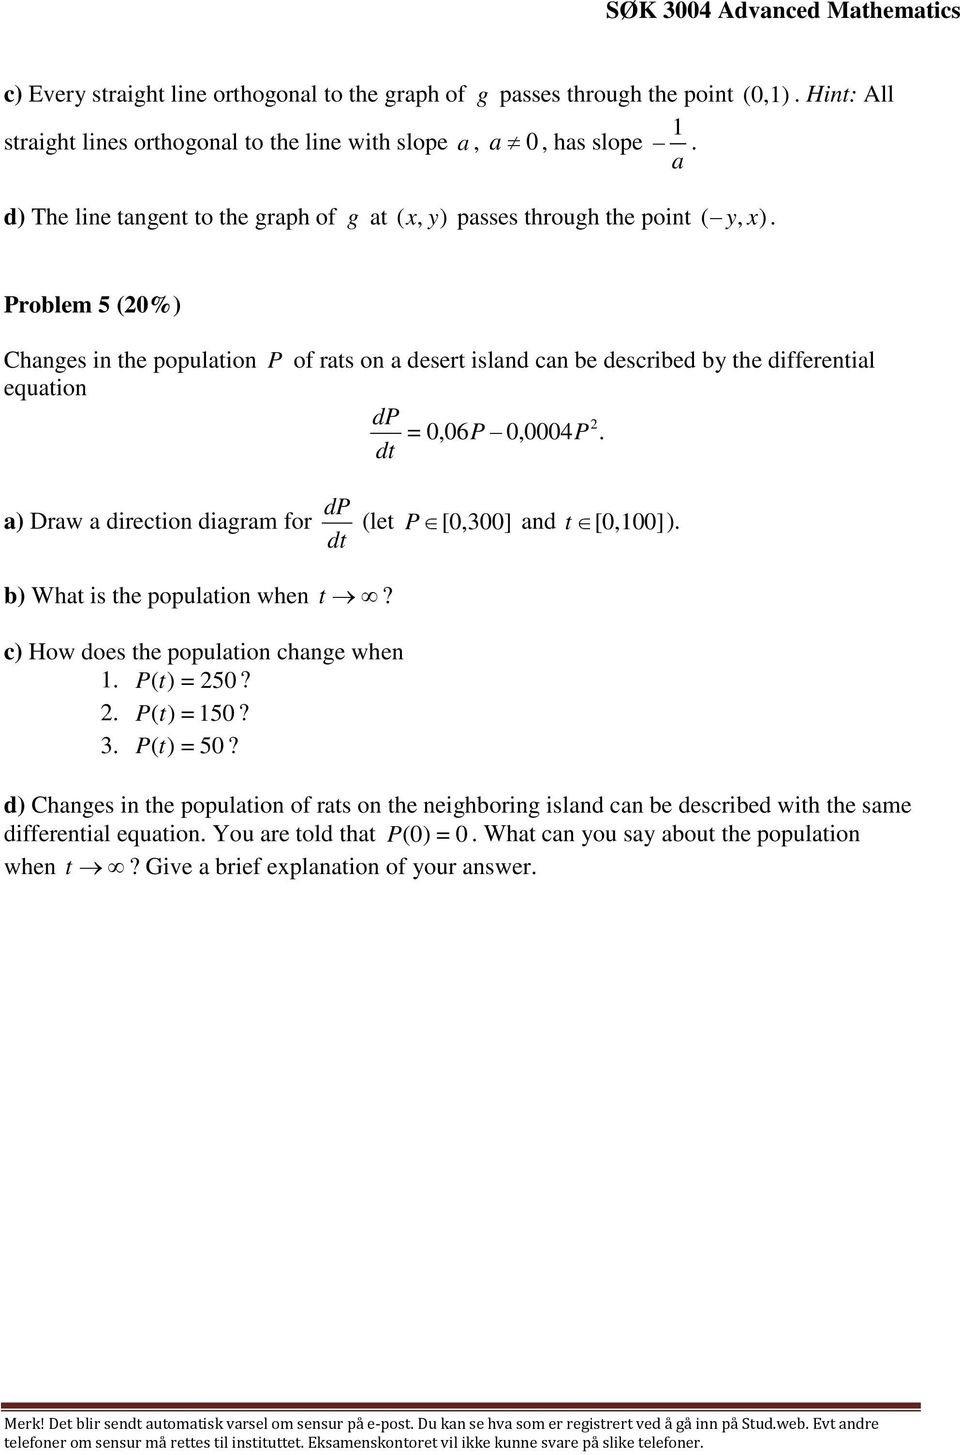 0,0004P dt dp a) Draw a direction diagram for (let P [0,300] and t [0,00] ) dt b) What is the population when t? c) How does the population change when P (t) = 50? P (t) = 50? 3 P (t) = 50?